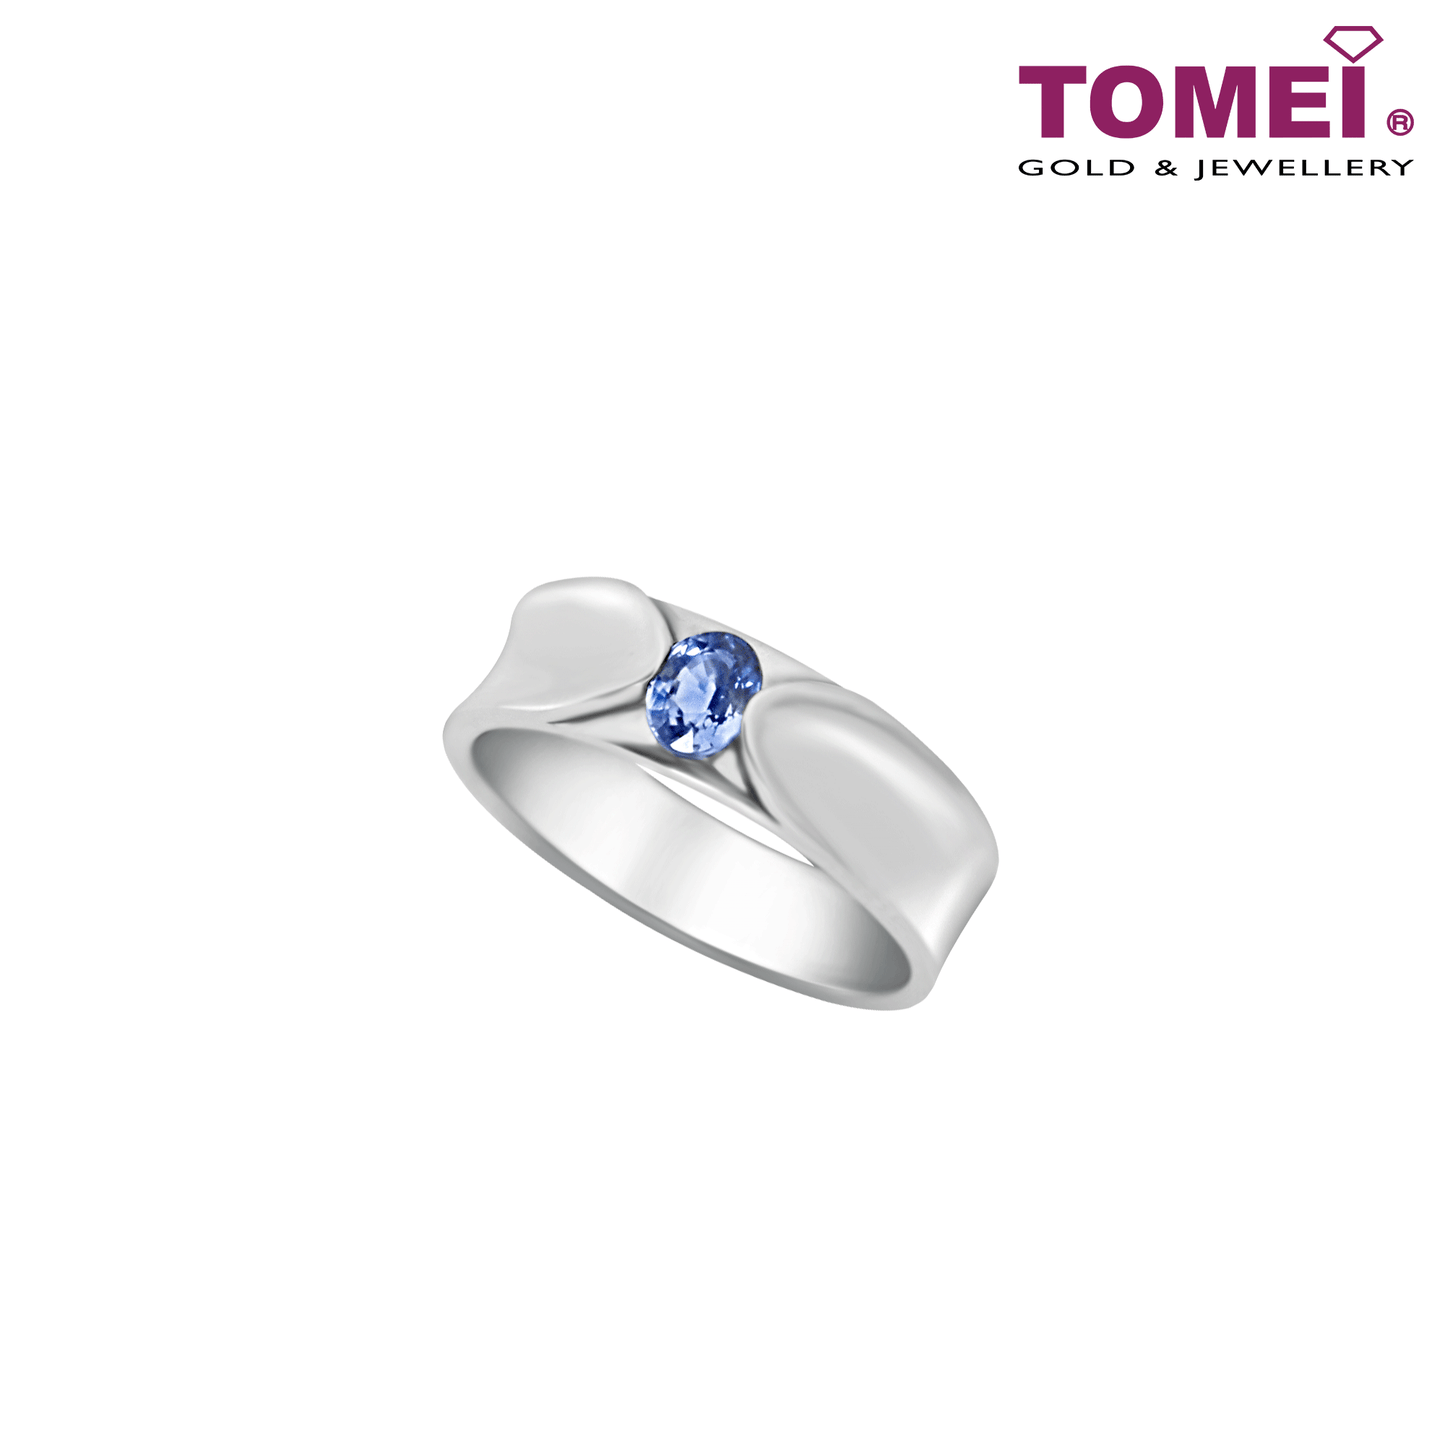 TOMEI Homme Series, Ring with Sapphire Sophistication, Silver 925 + Palladium (HOM-R2536)